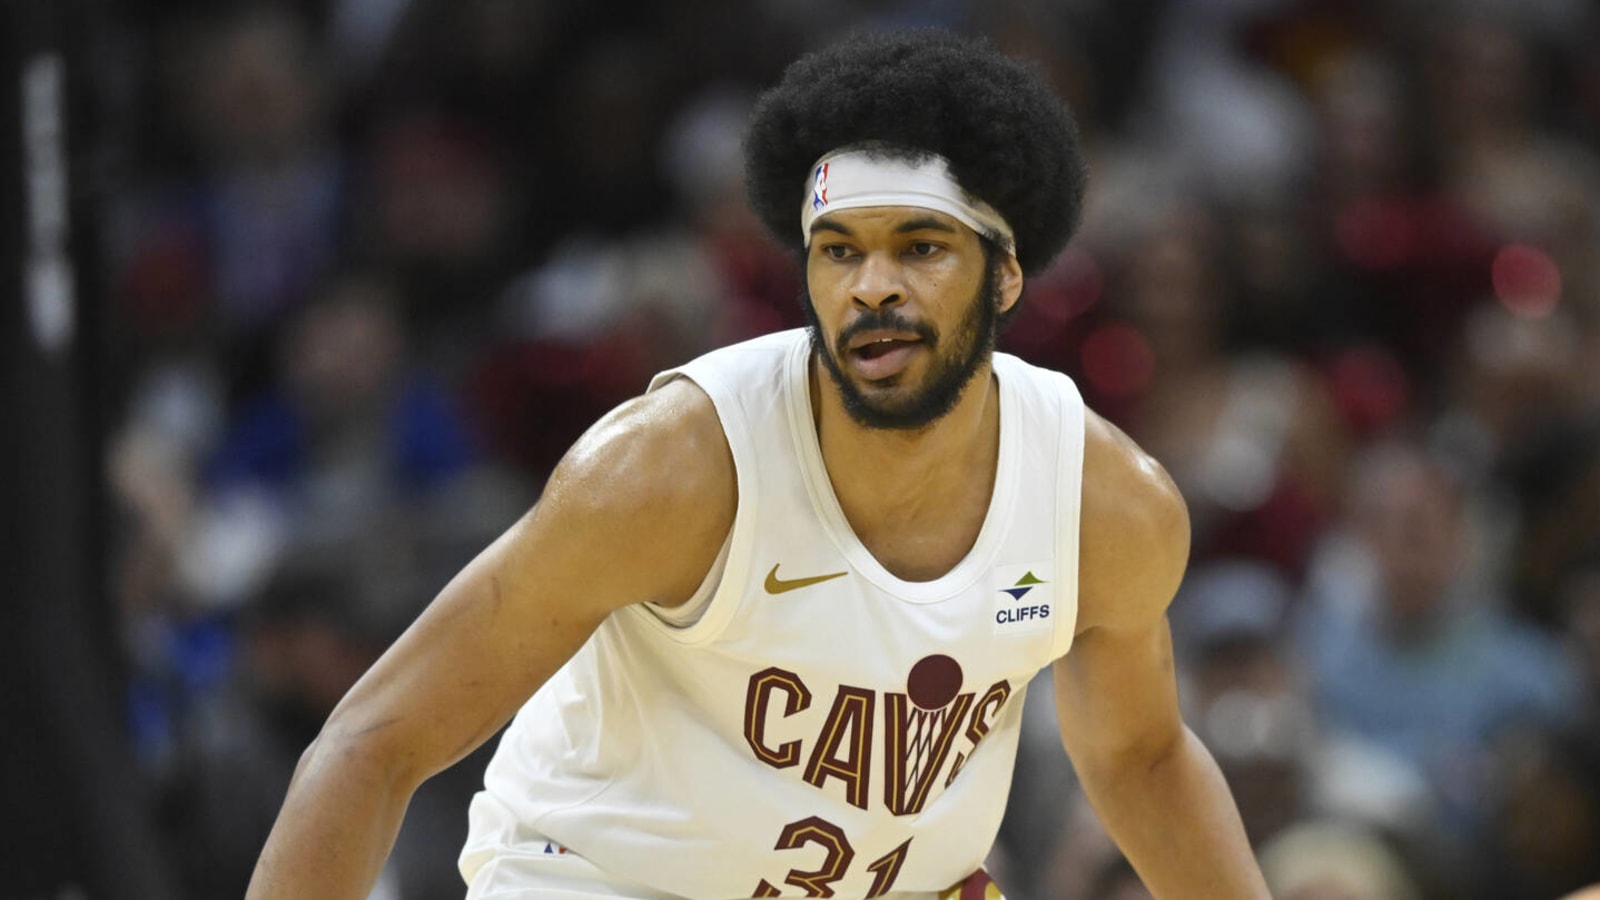 Report: Some Cavaliers Members Were Frustrated Jarrett Allen Refused Injection In Rib To Try And Numb Pain And Play